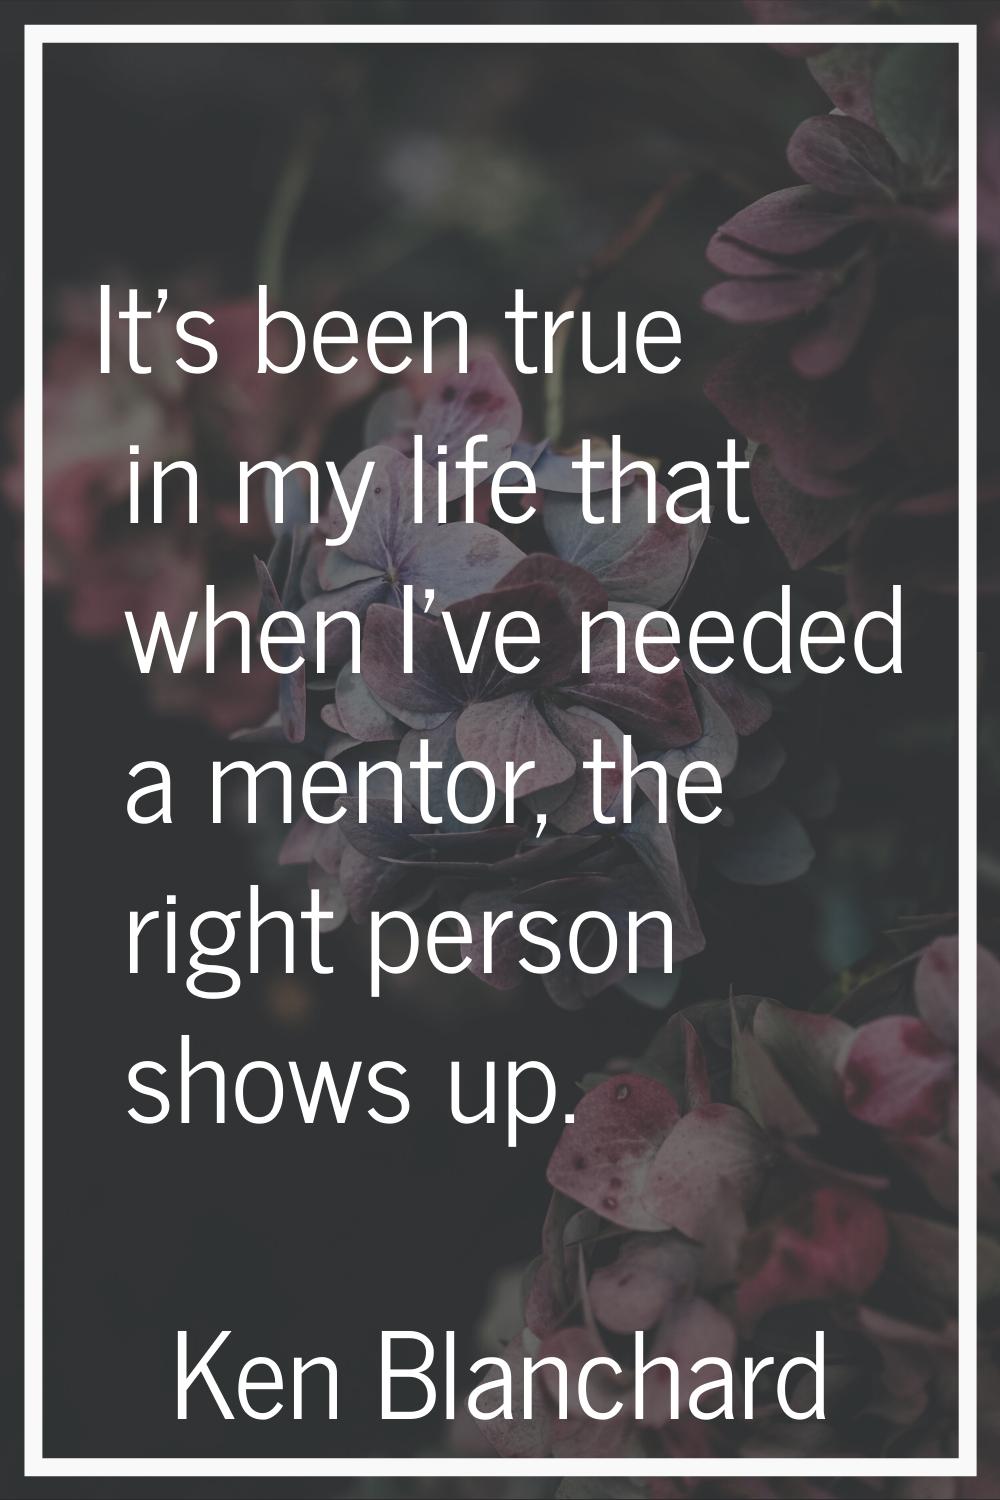 It's been true in my life that when I've needed a mentor, the right person shows up.